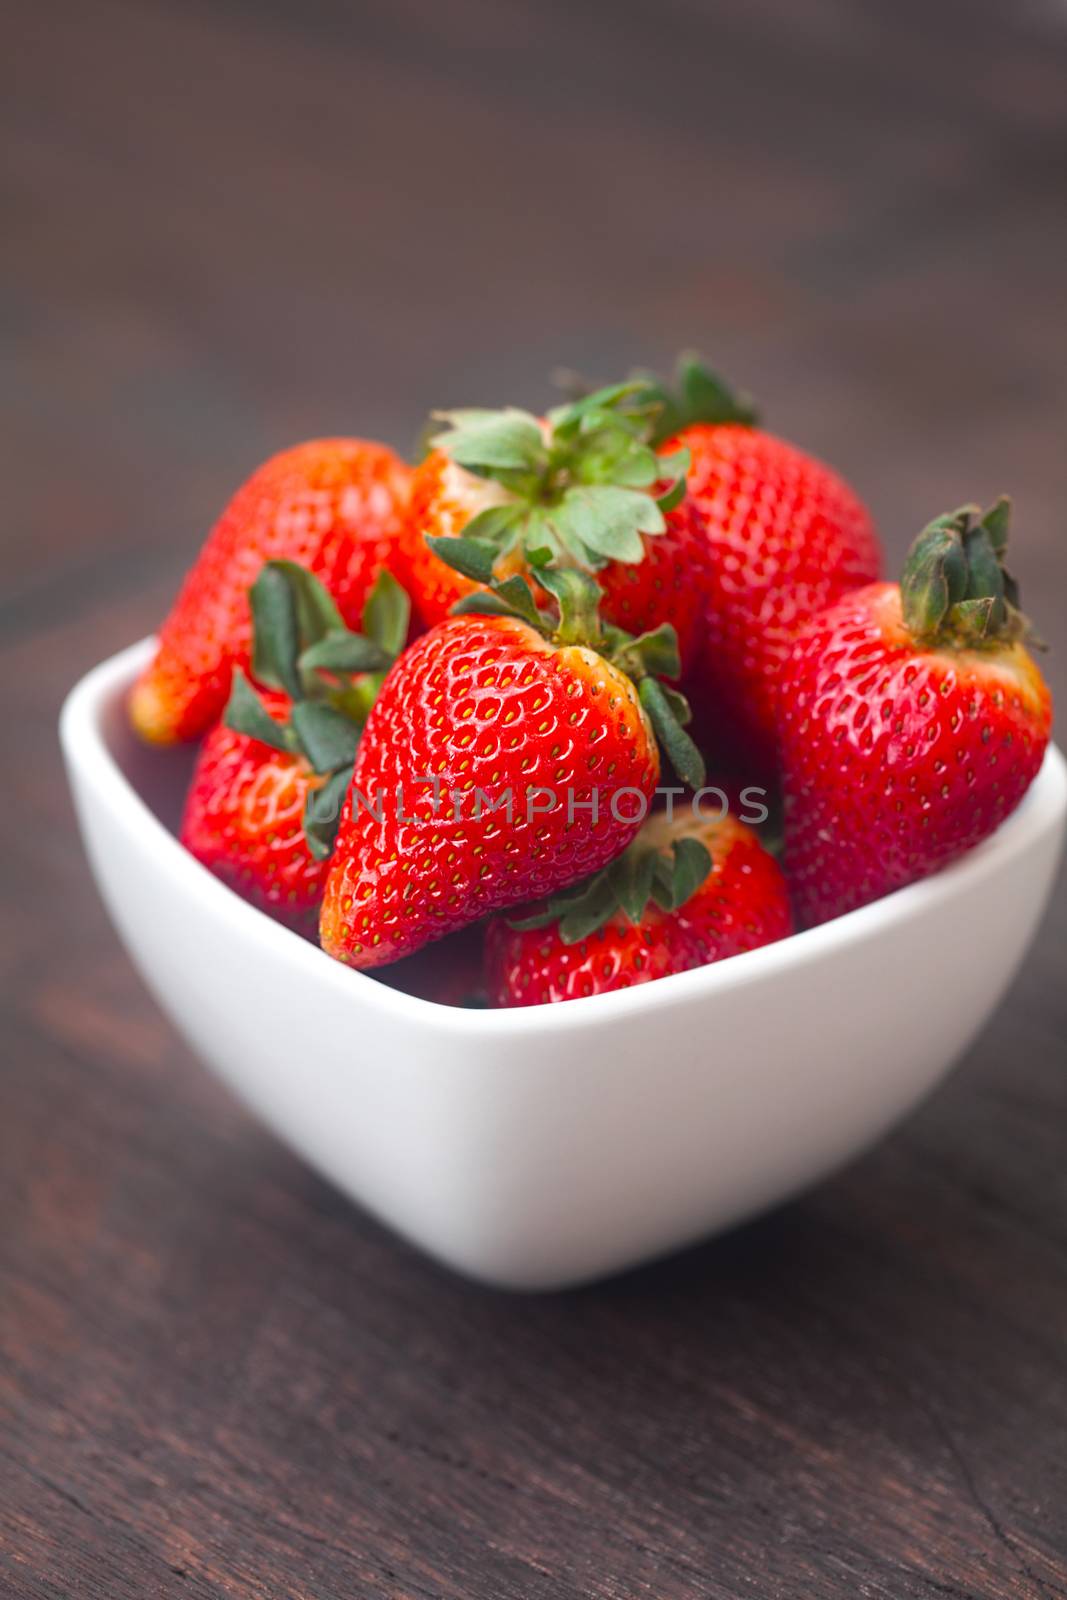 red juicy strawberry in a bowl on a wooden surface